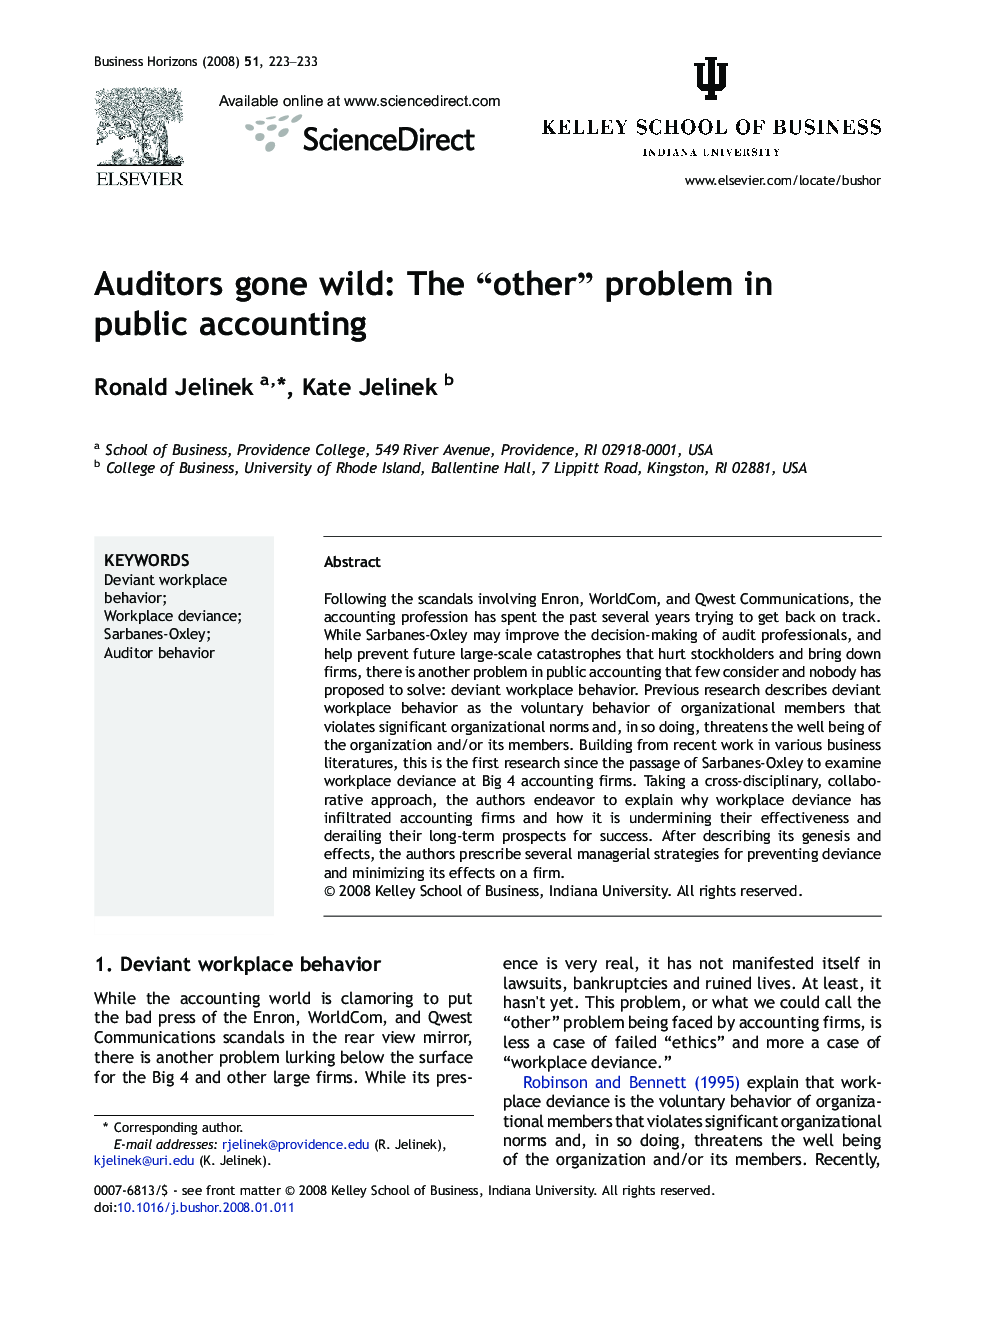 Auditors gone wild: The “other” problem in public accounting